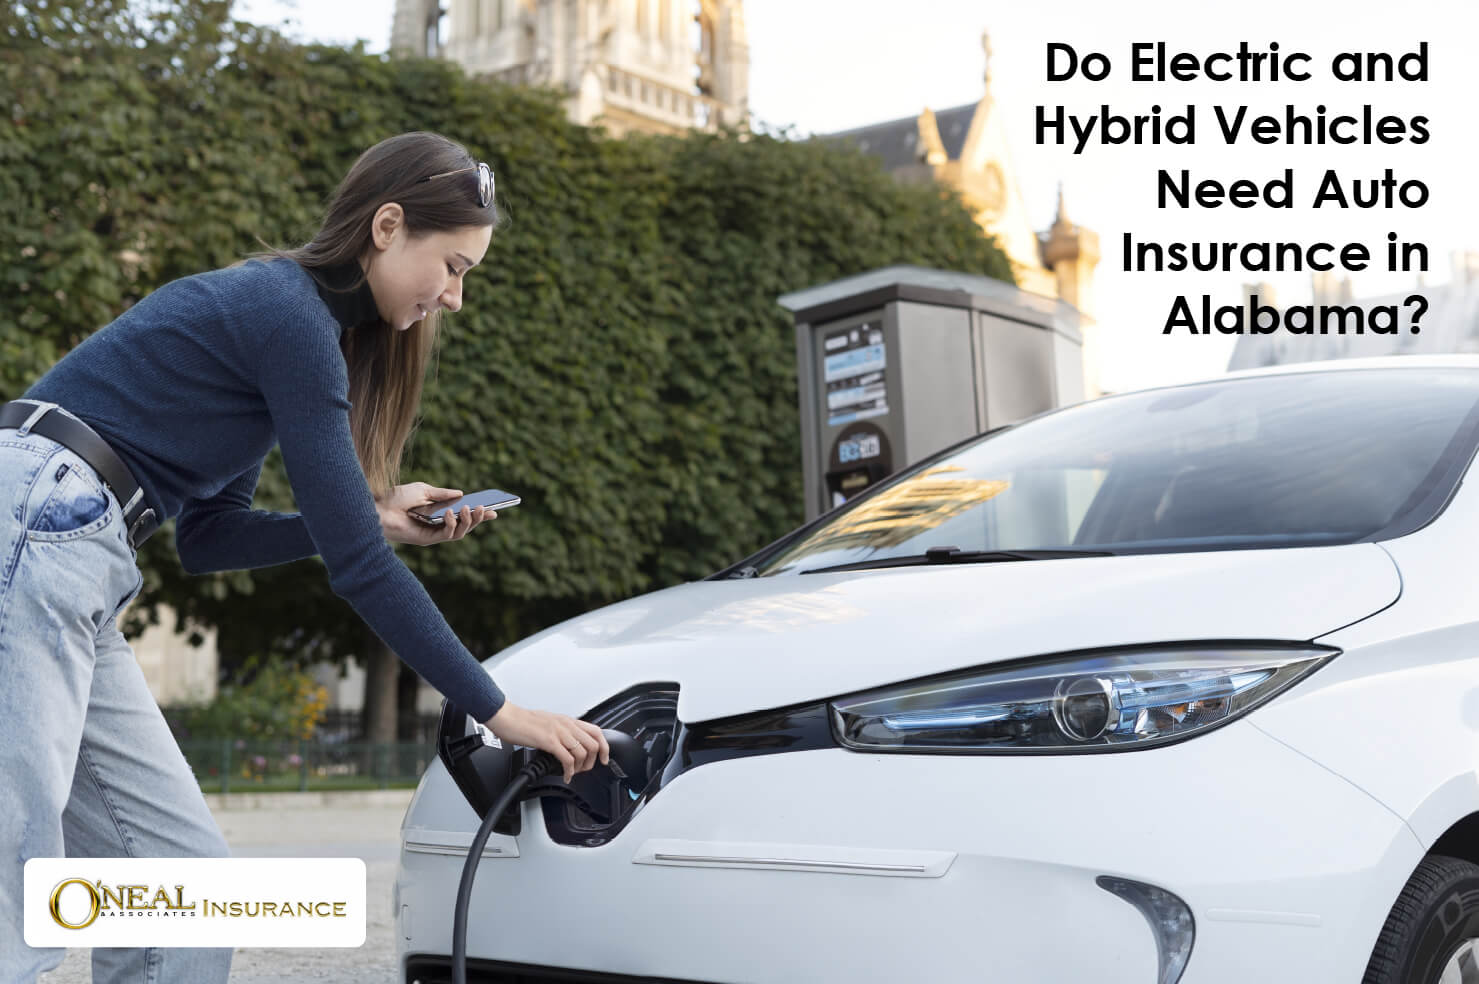 Do Electric and Hybrid Vehicles Need Auto Insurance in Alabama